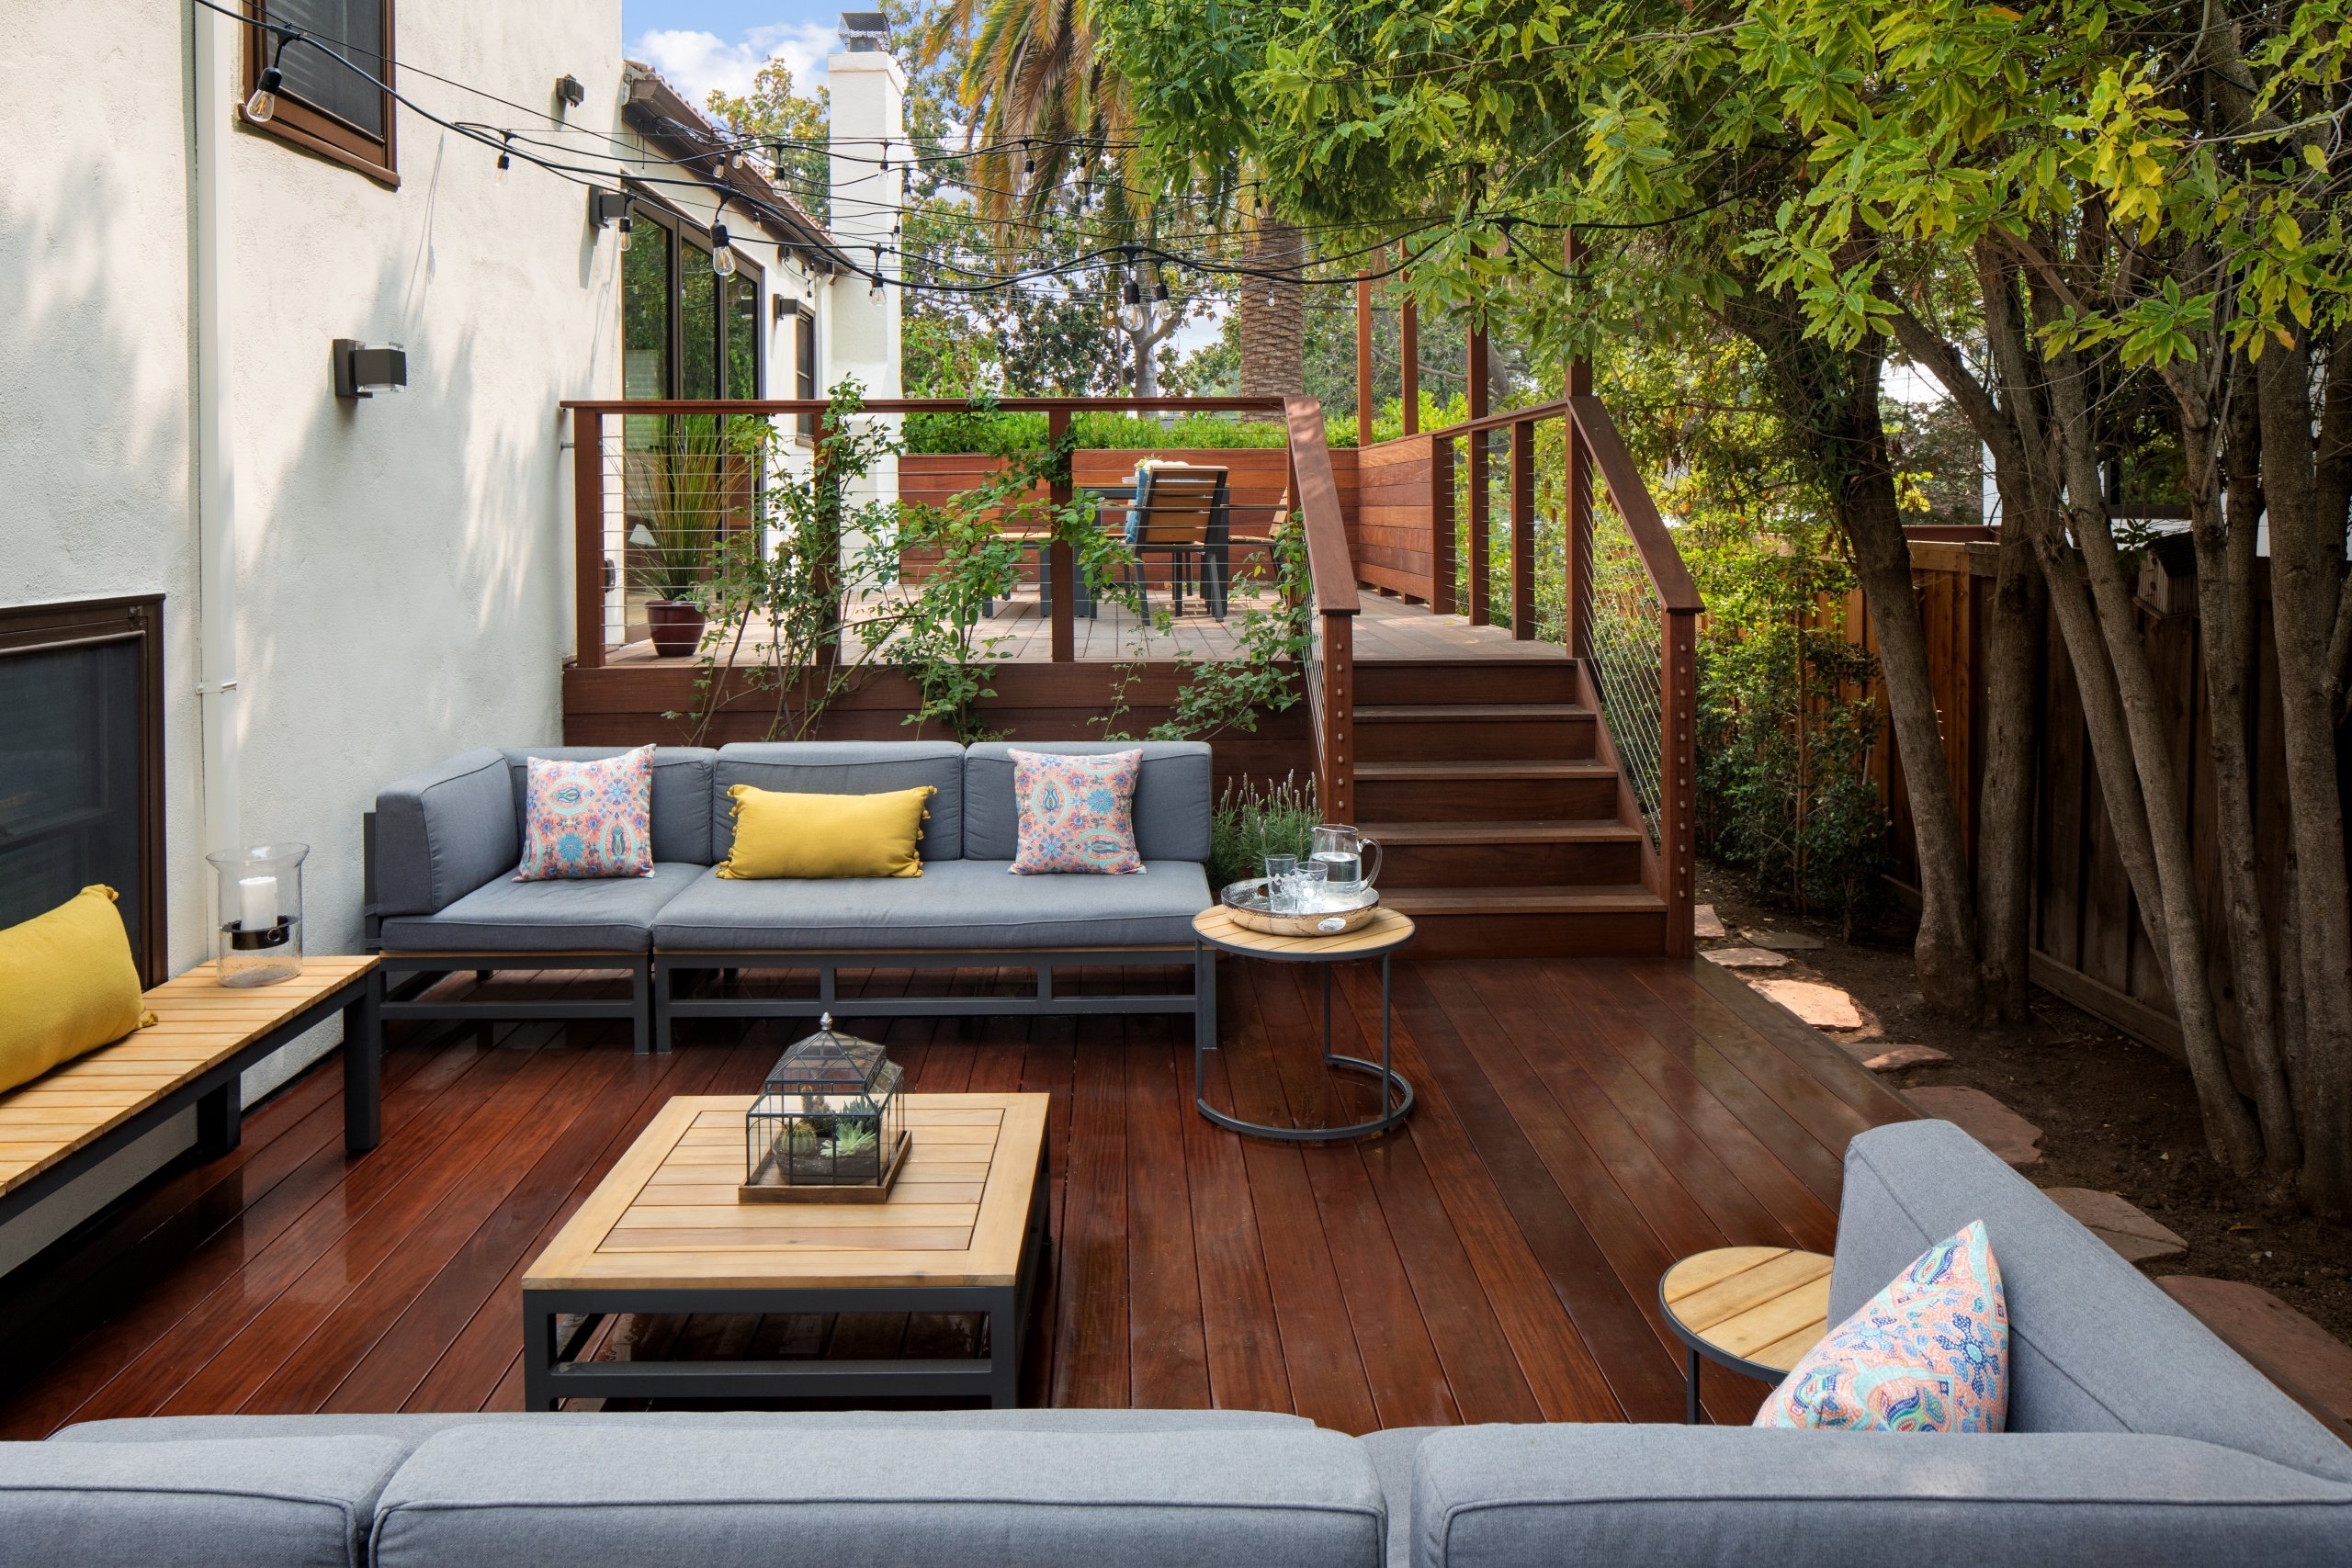 Comfortable couches in outdoor seating area on wooden deck